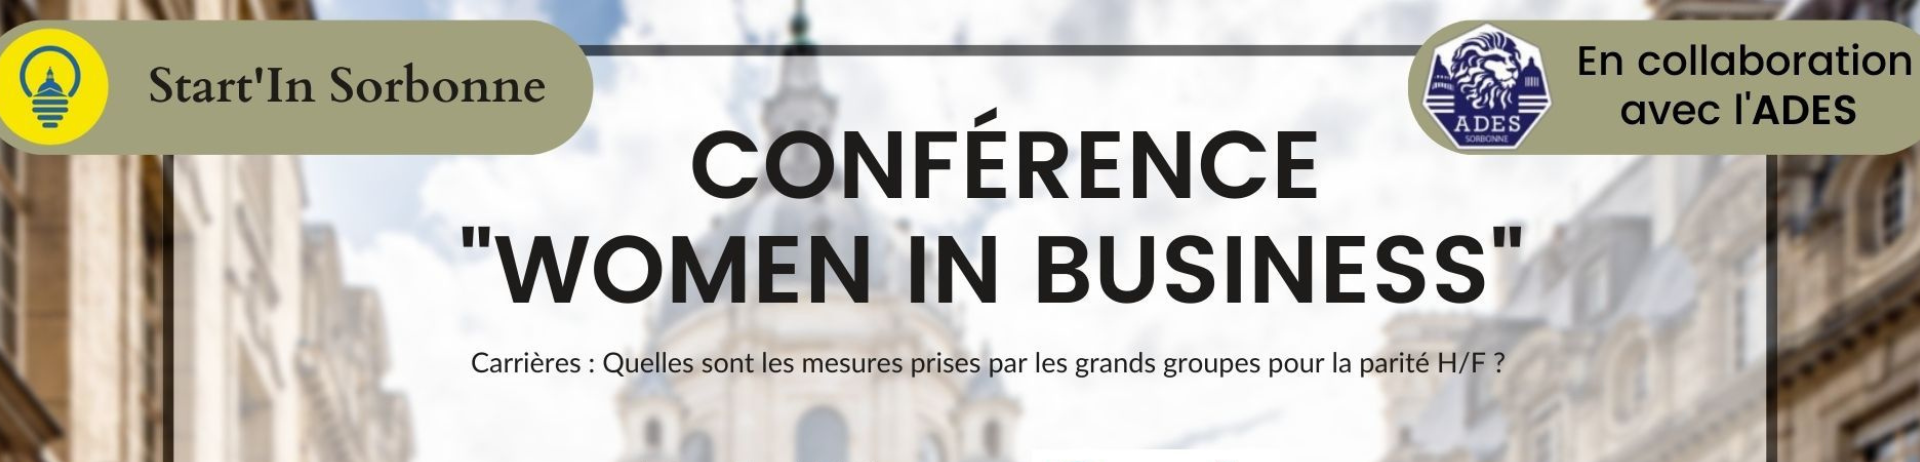 conférence women in business